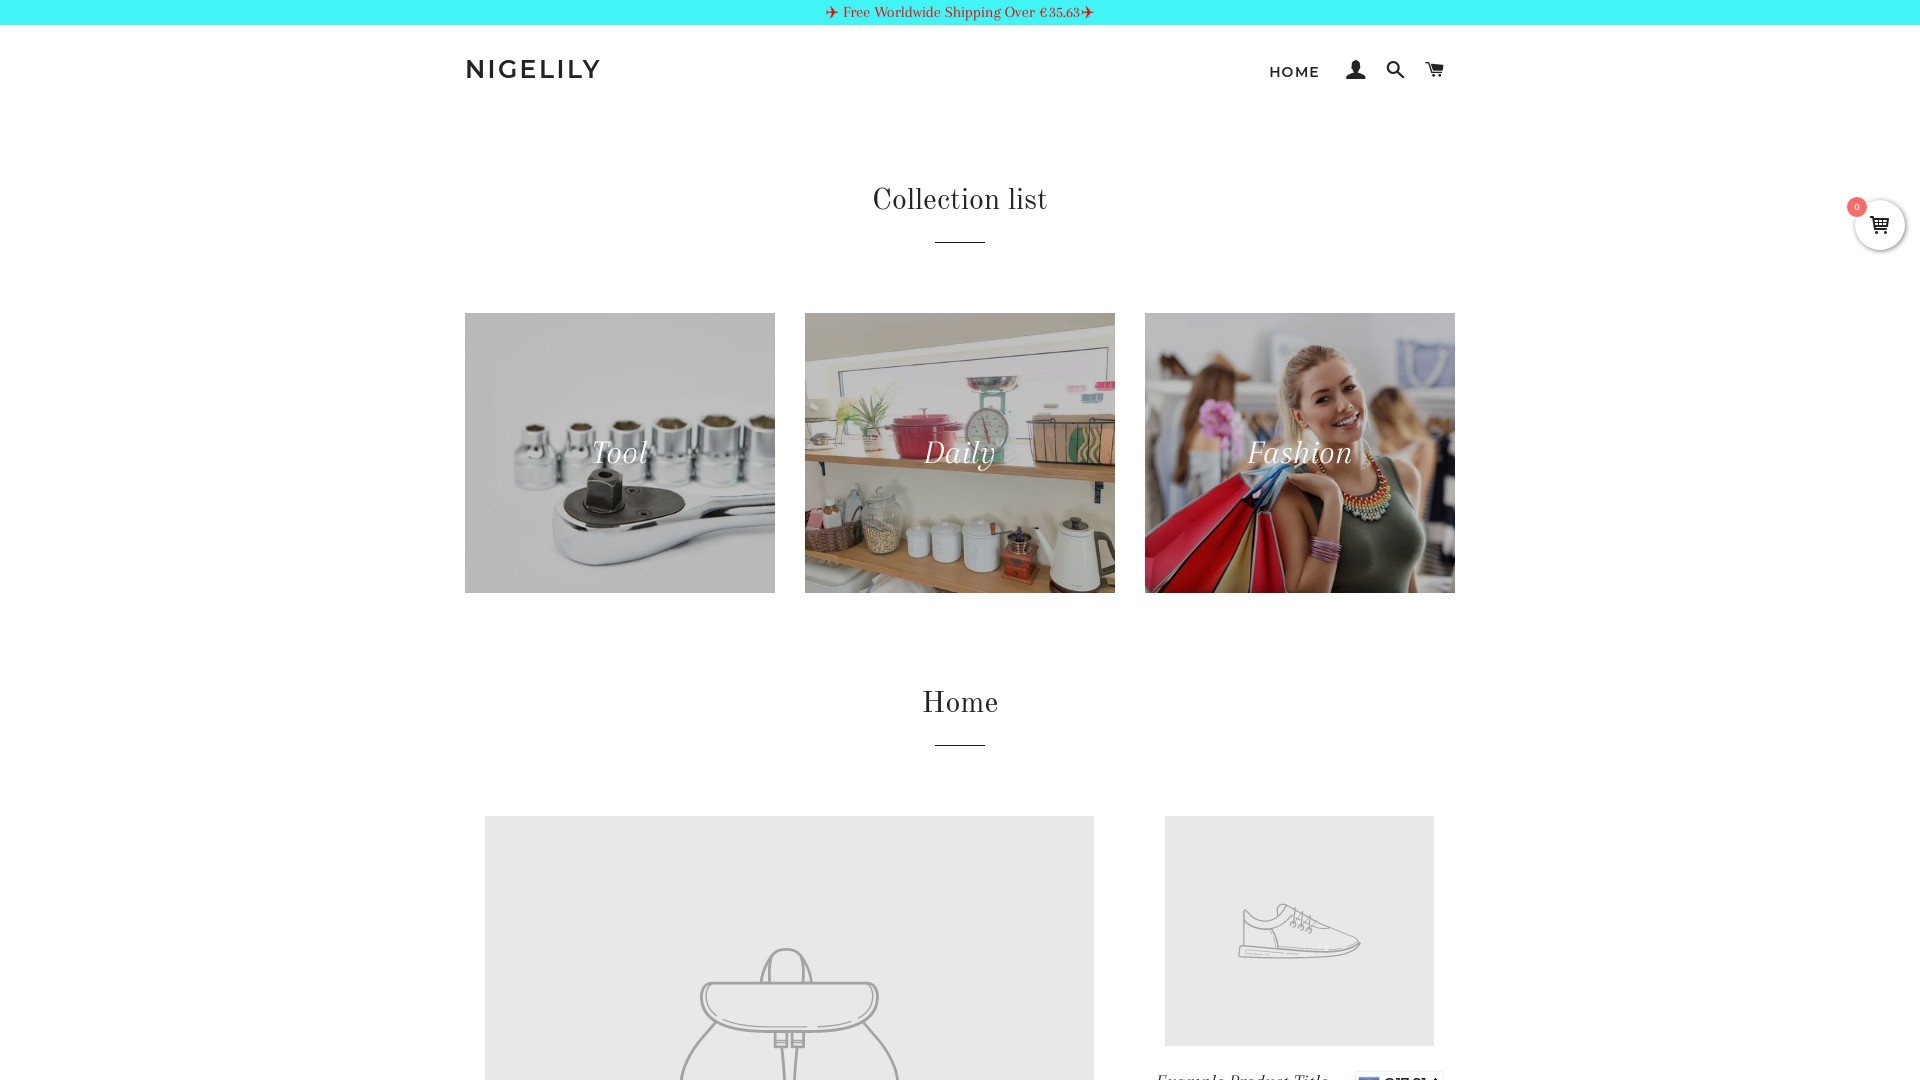 Nigelily located at nigelily.com